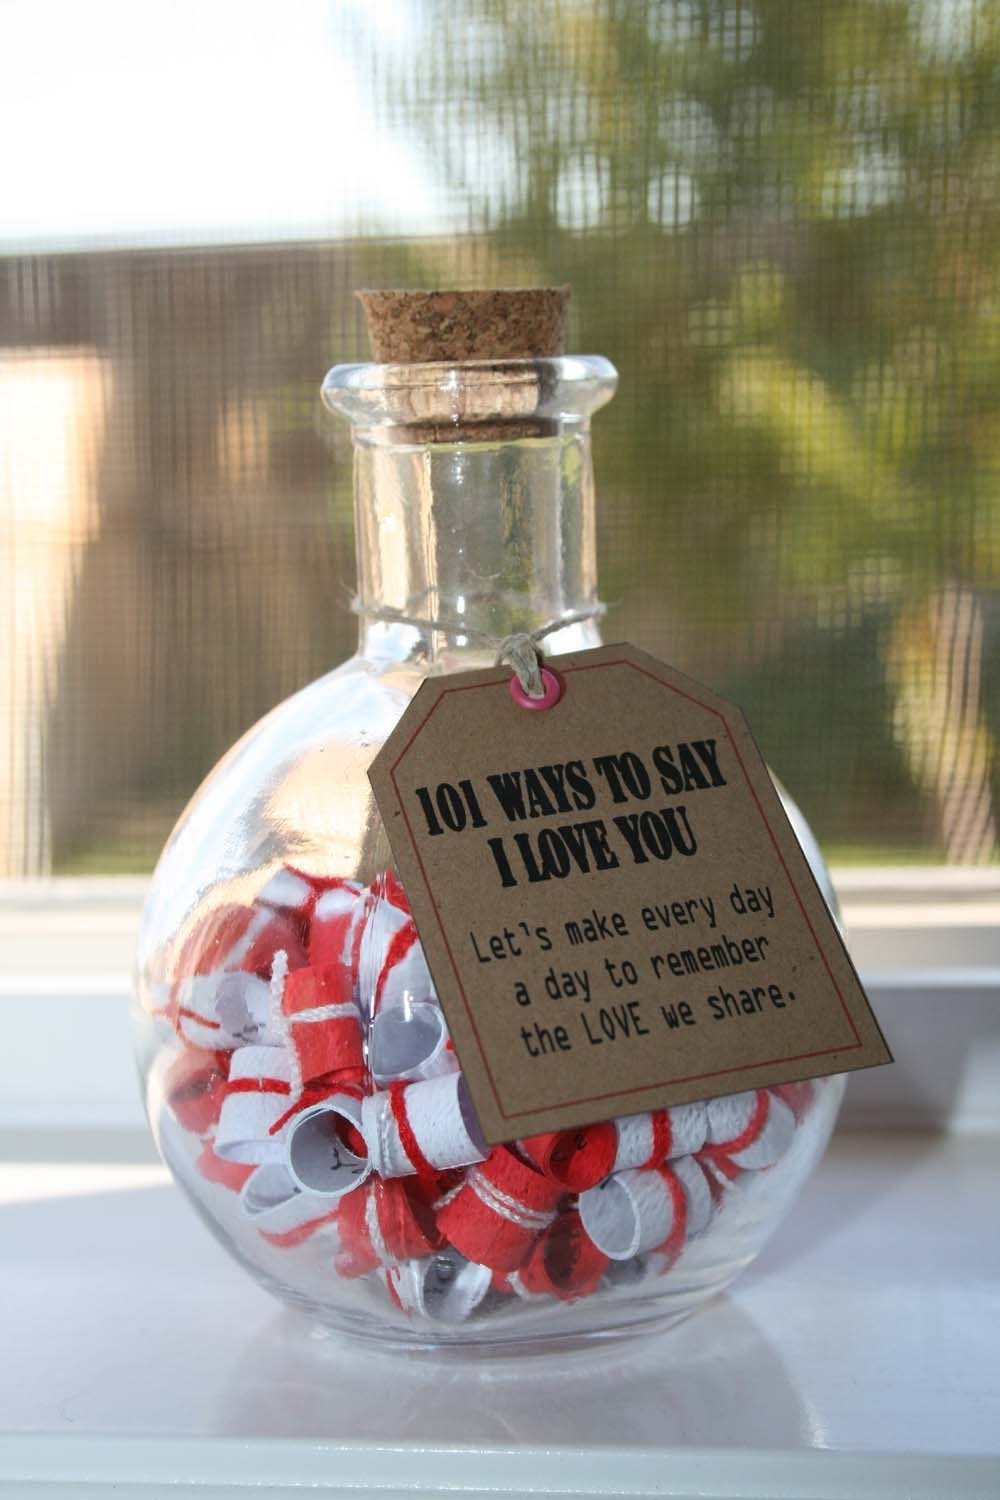 10 Famous Unique Gift Ideas For Girlfriend anniversary gift 101 ways to say i love you unique cute gift 3 2022